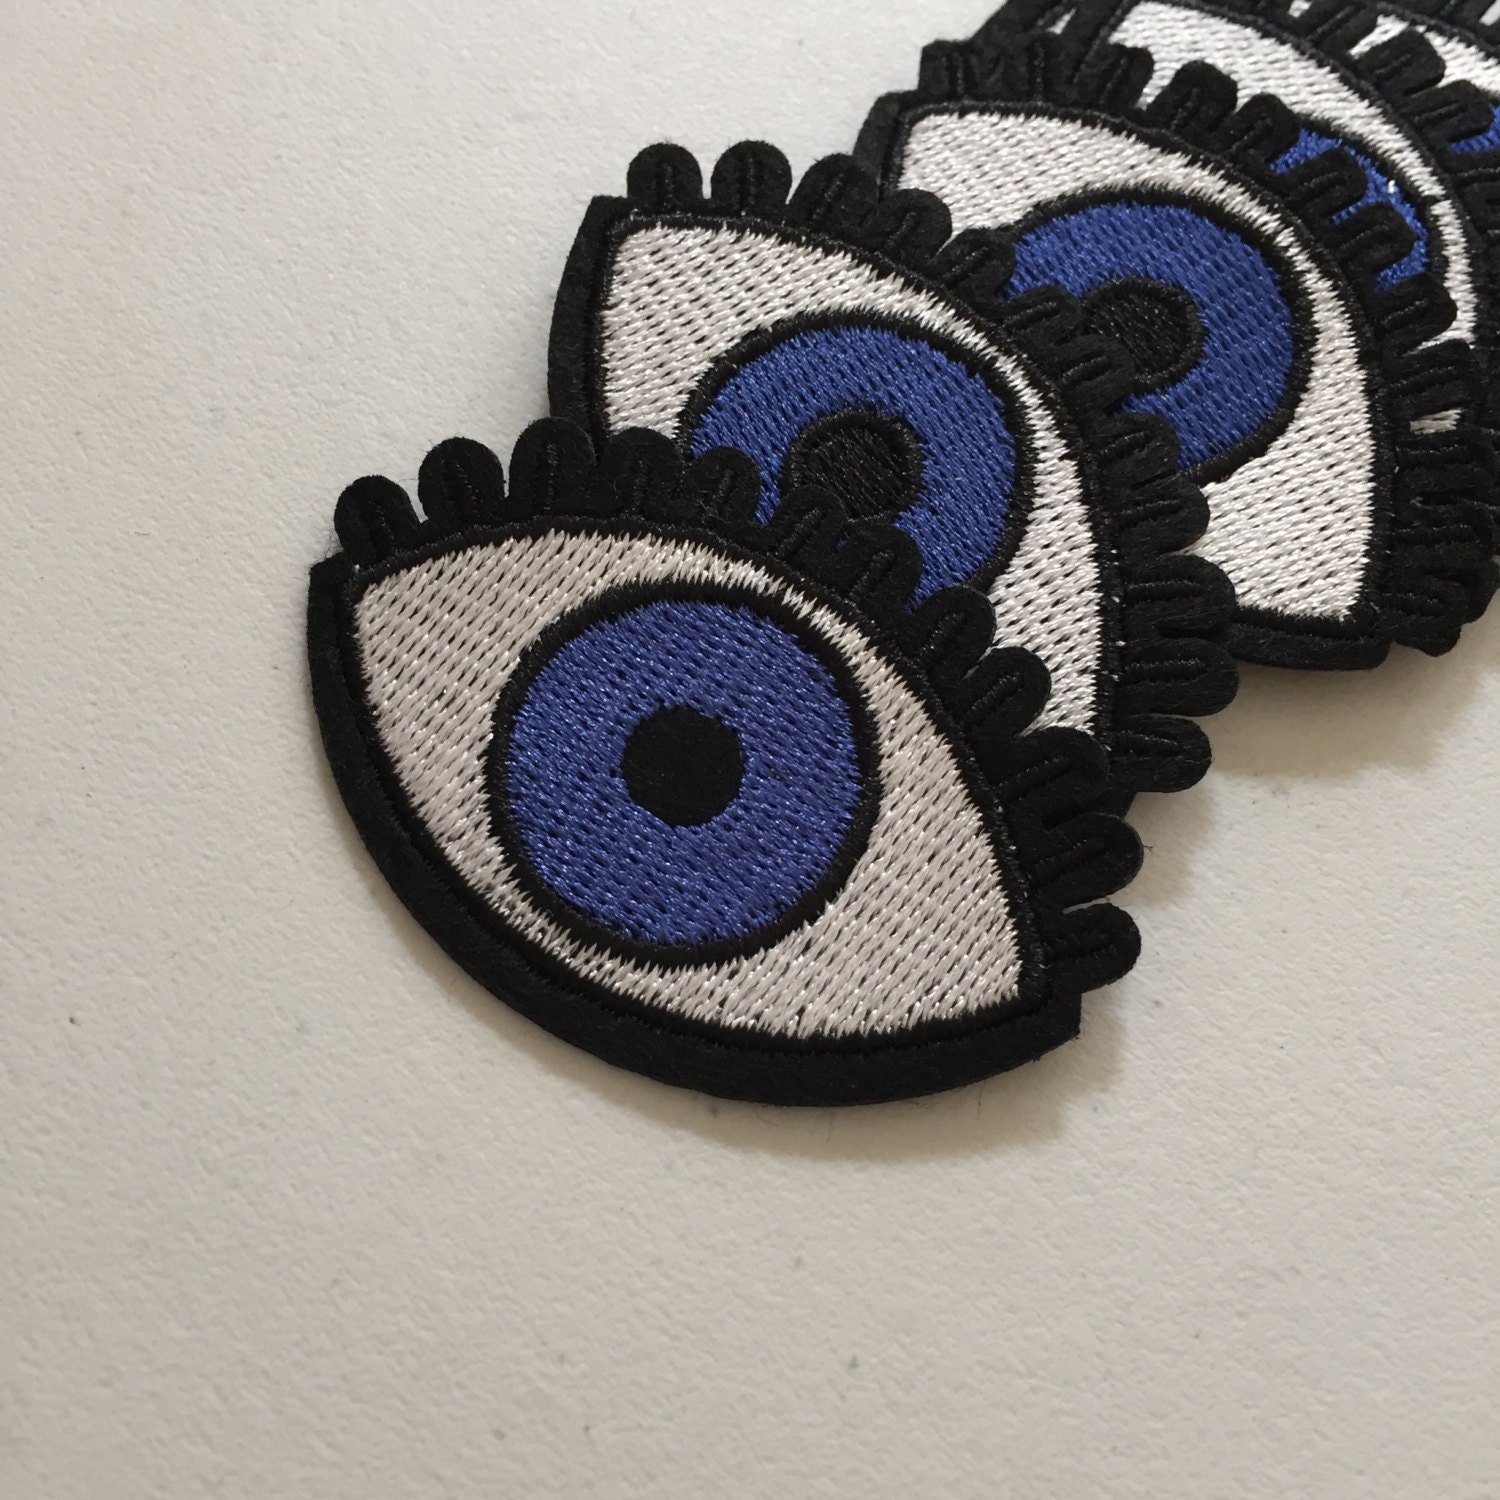 Evil Eye Iron on Large Sequins Patches Appliques Blue Eye Sewing Applique Patches, Size: 9 x 5.1